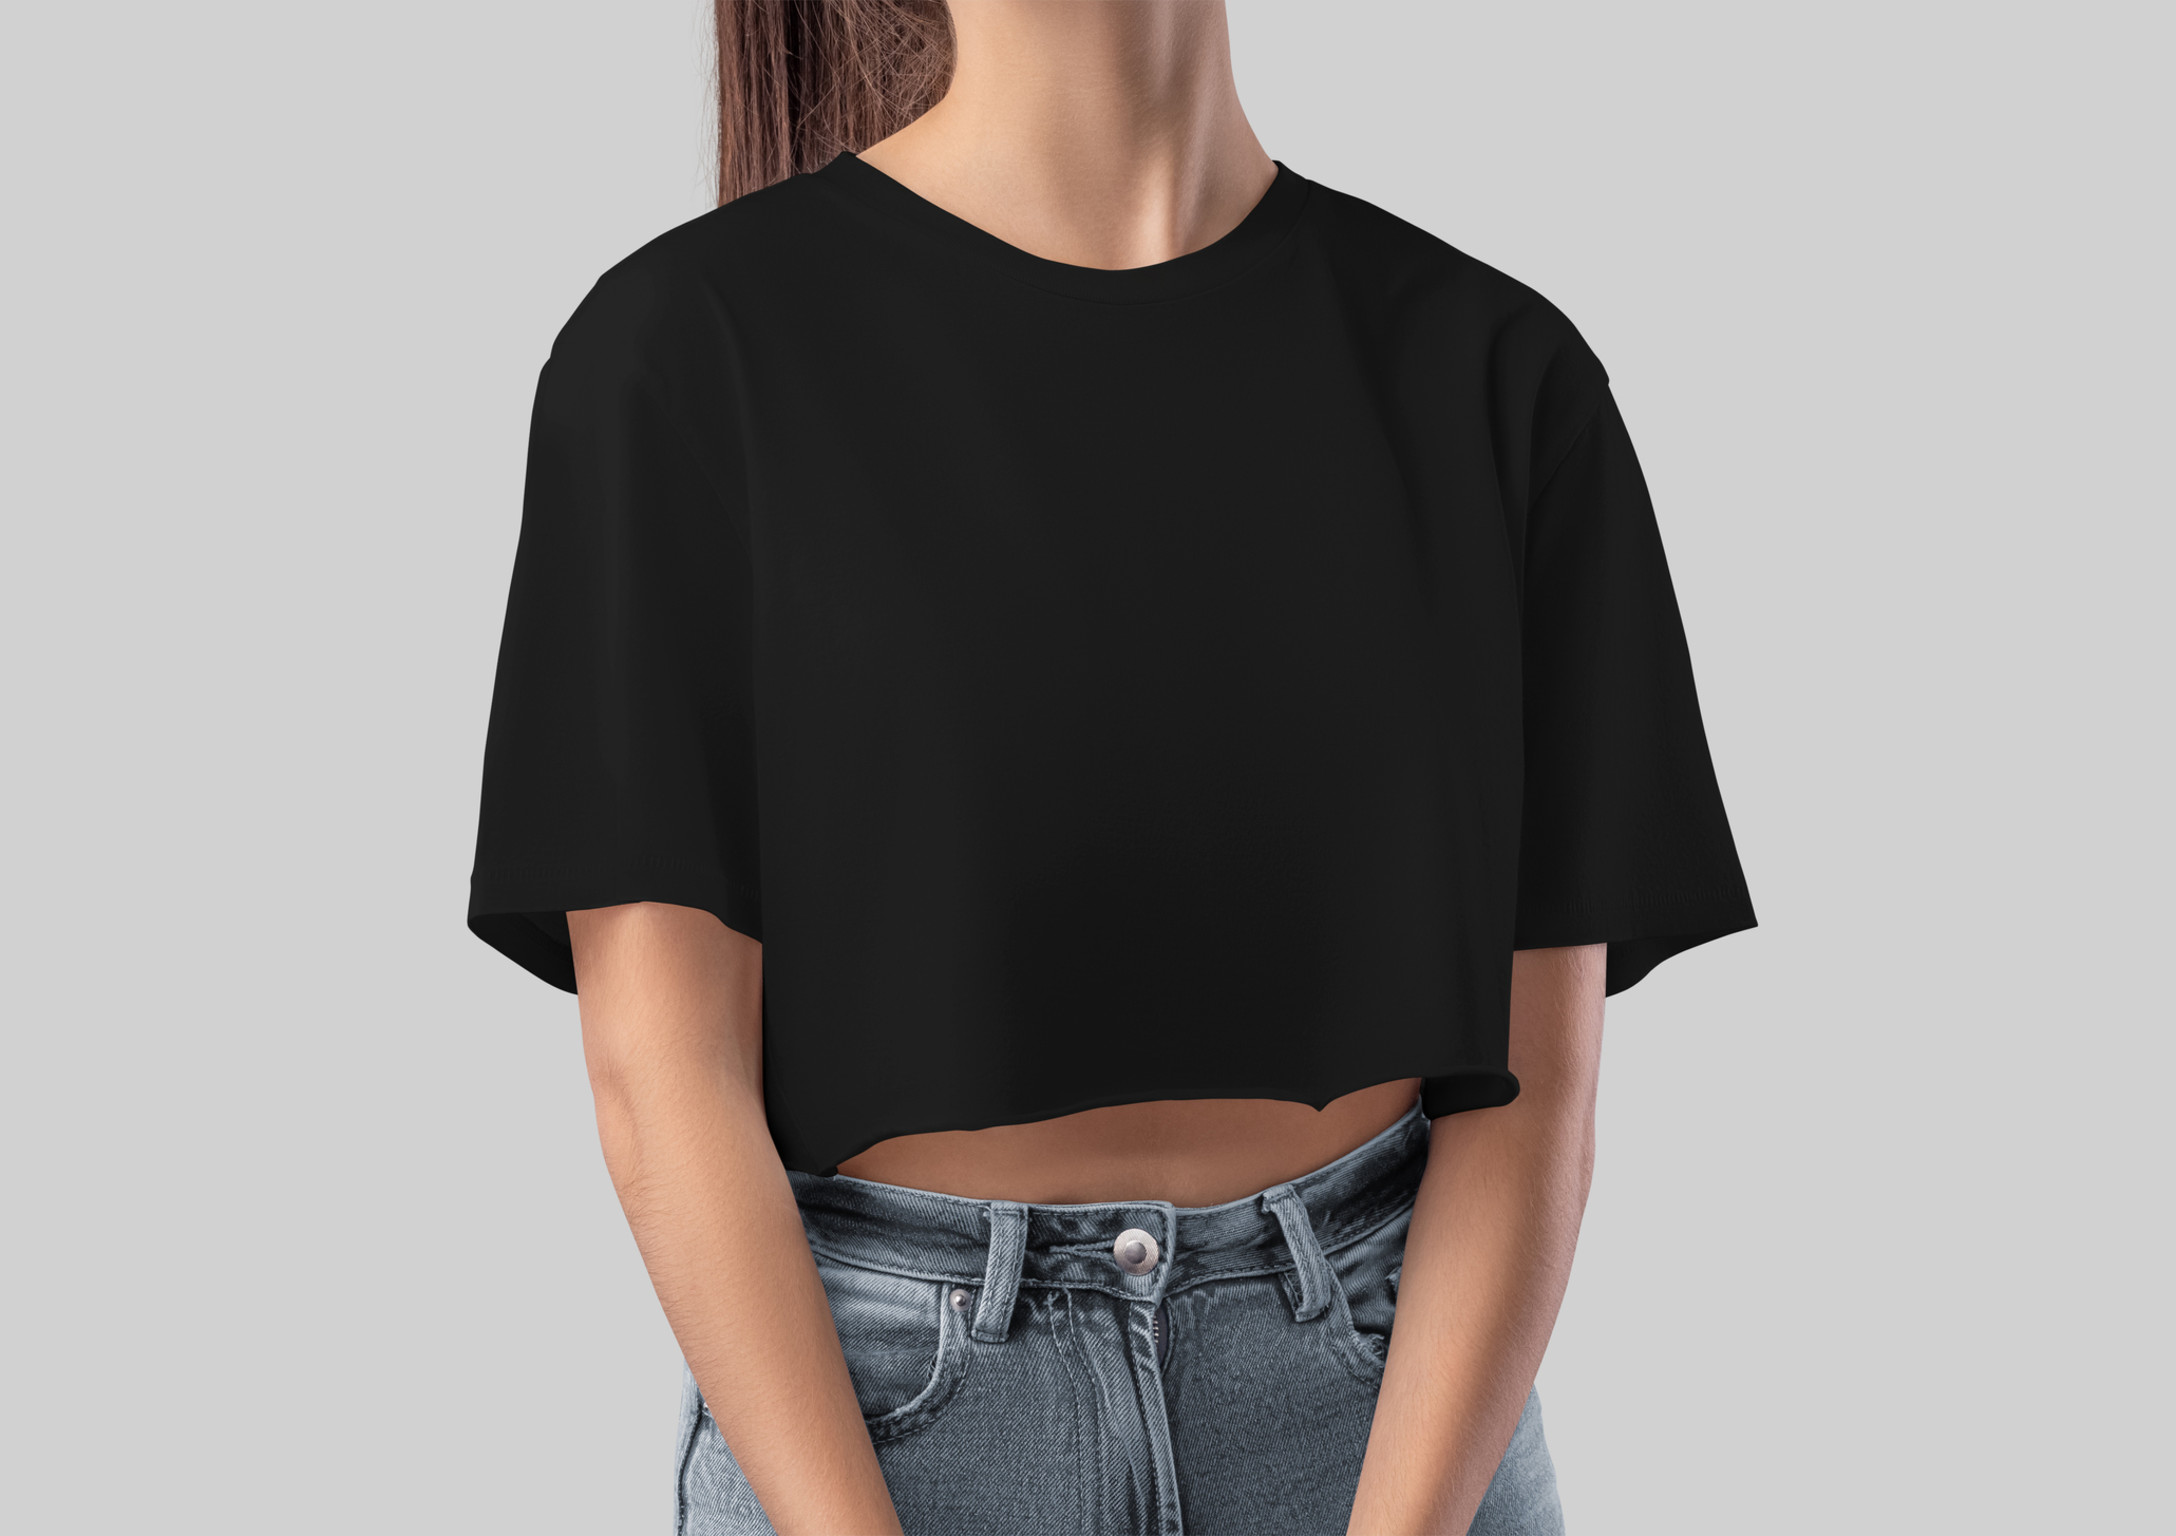 I bought the viral Primark crop top - I've no idea why people are